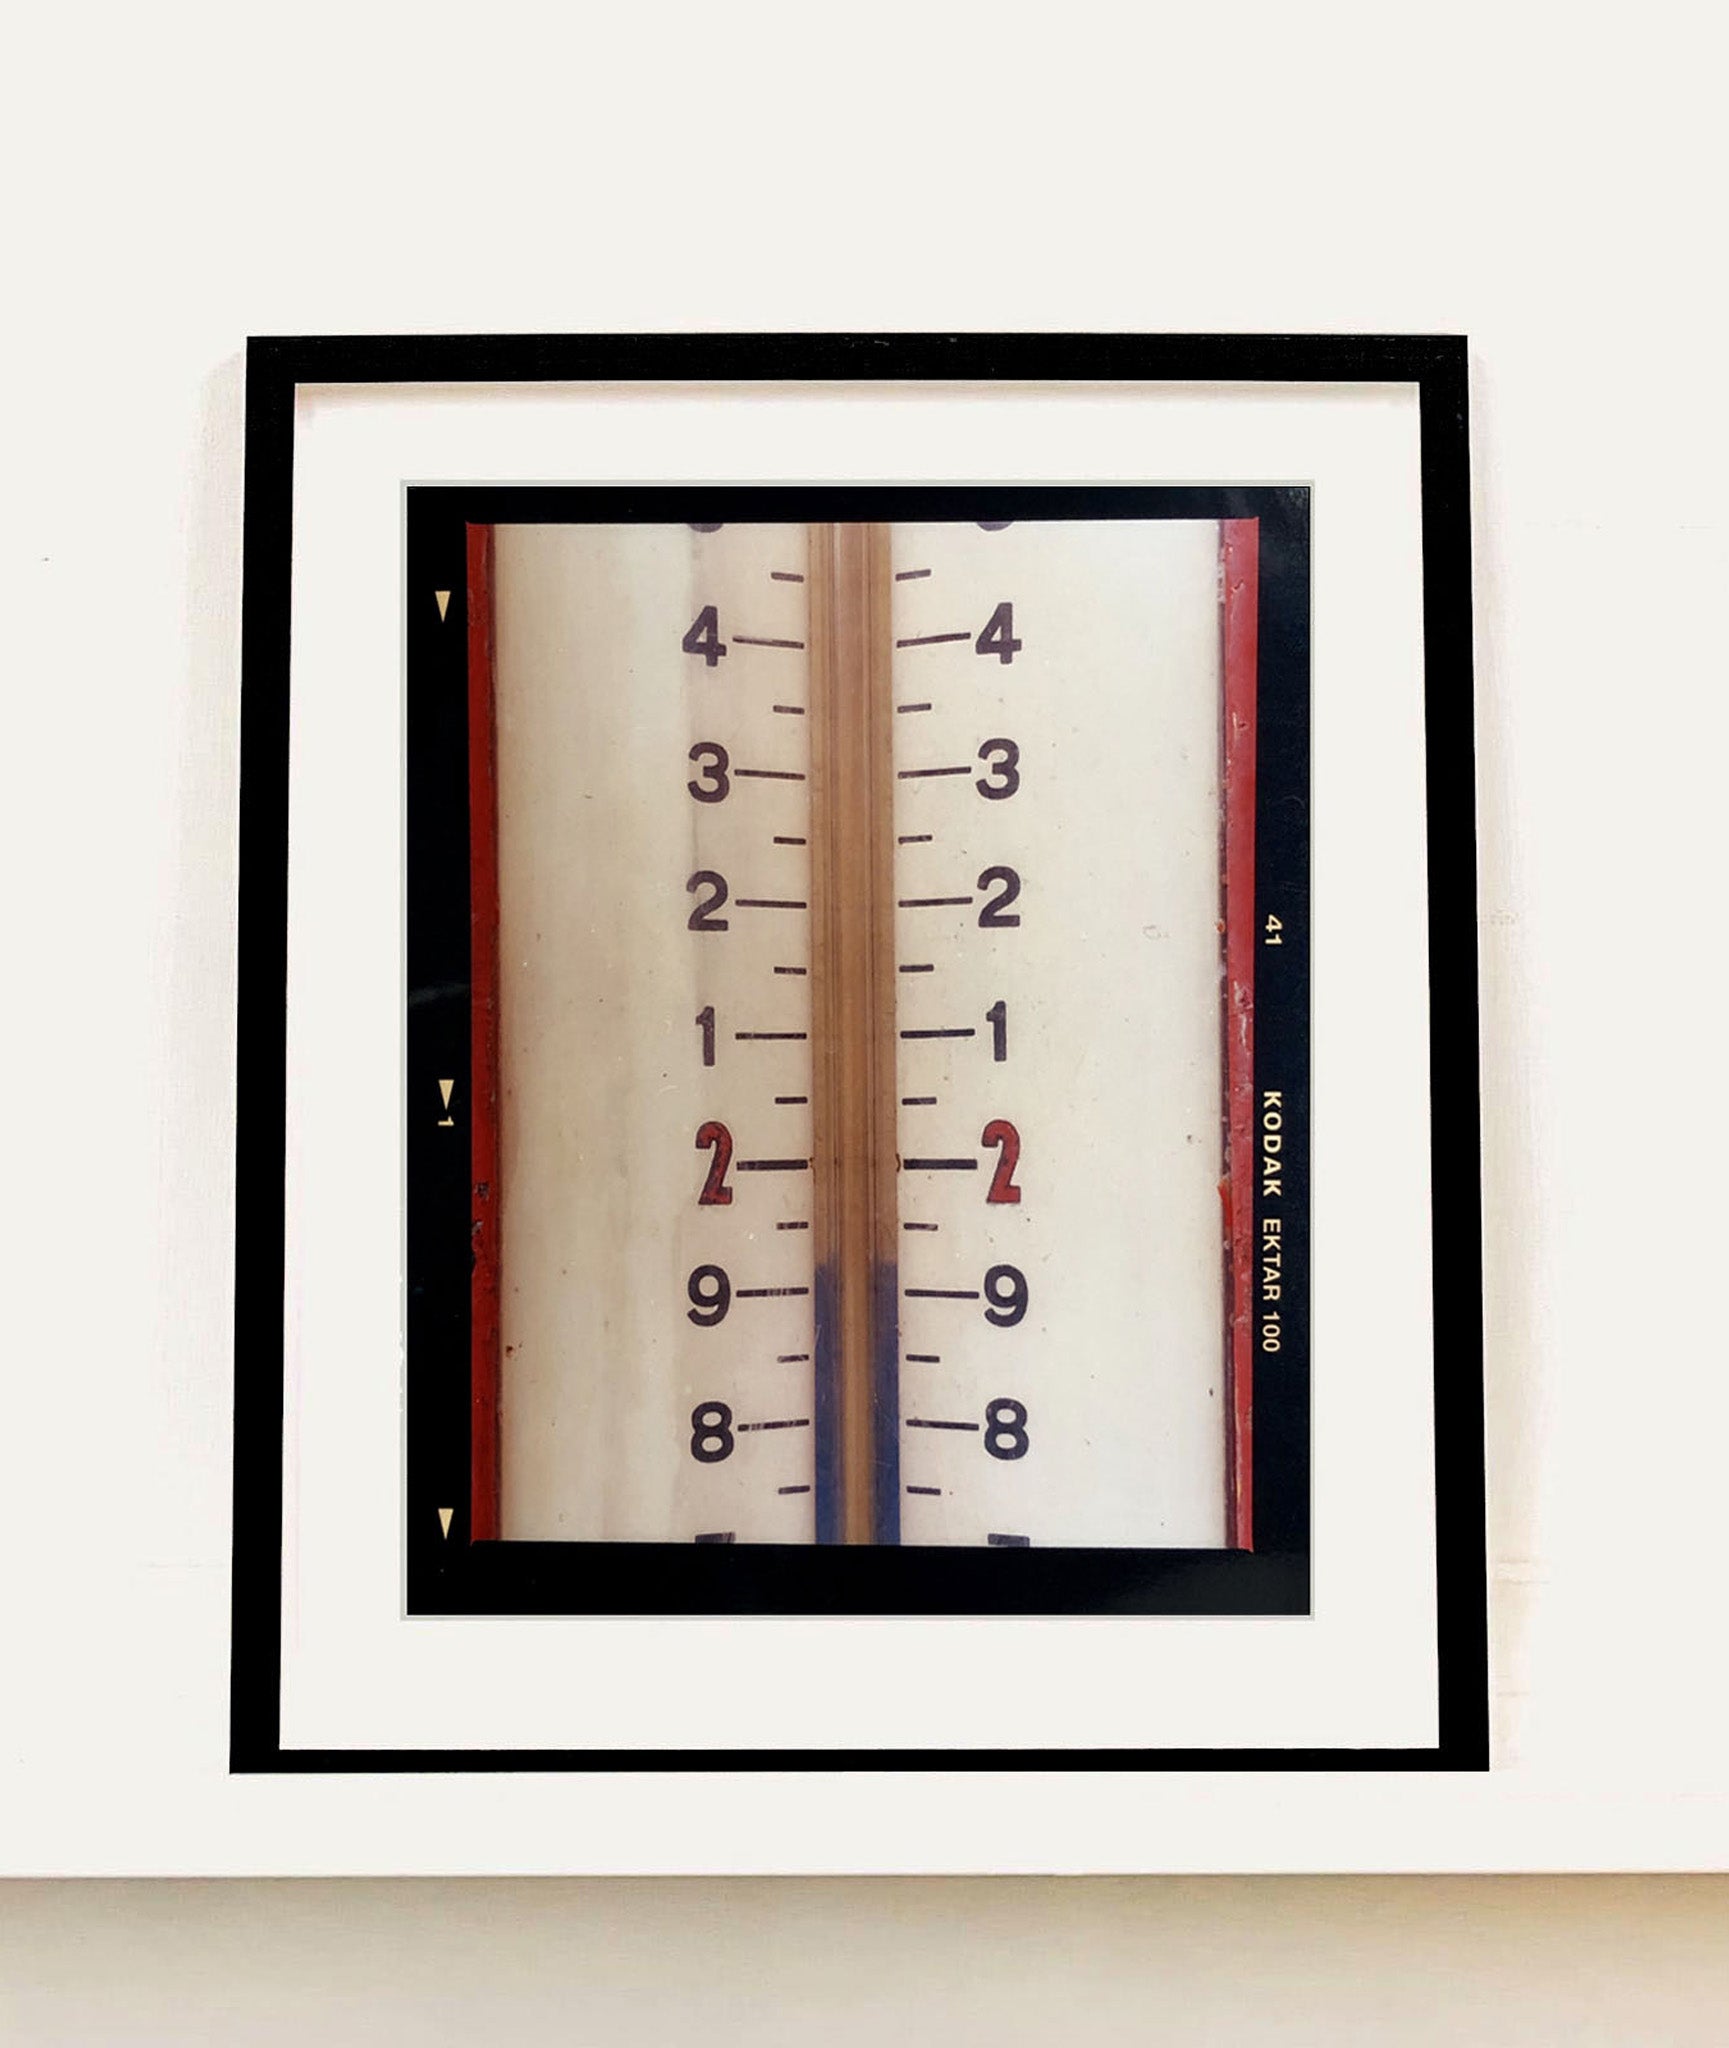 'Tyre Pressure Gauge' is part of Richard Heeps' series 'A Short History of Milan' which began in November 2018 for a special project featuring at the Affordable Art Fair Milan 2019, and the series is ongoing. There is a reoccurring linear, structural theme throughout the series, capturing the Milanese use of materials in design such as glass, metal, wood and stone. 